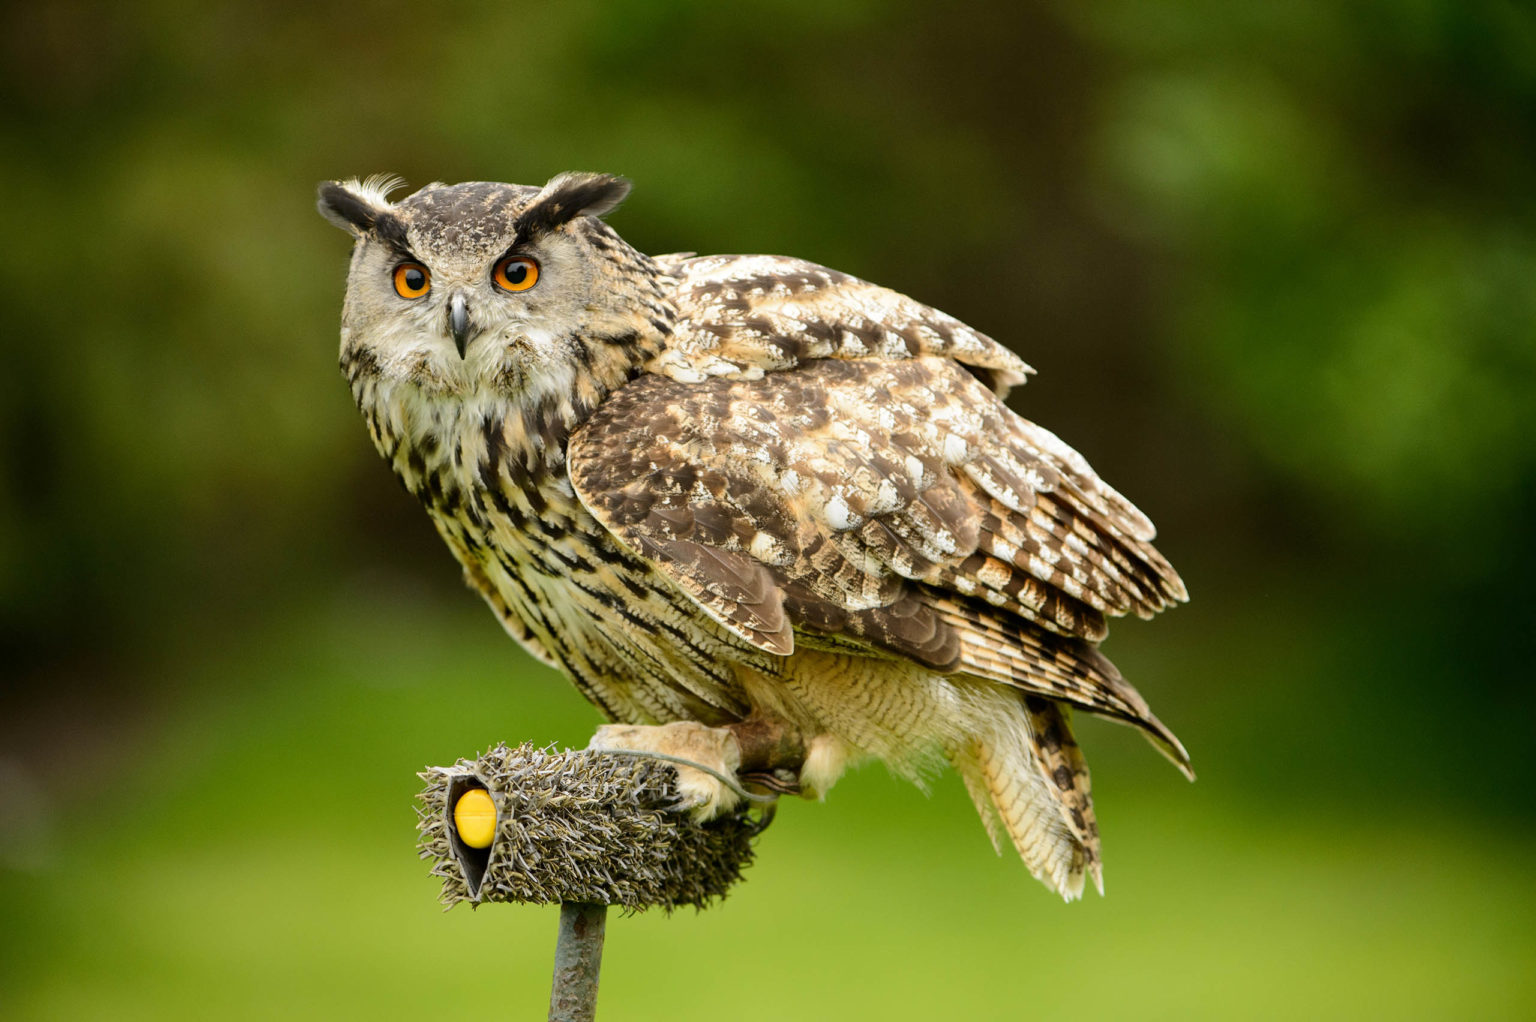 An owl on a perch at the Birds of Prey centre at Swinton Park Hotel in North Yorkshire